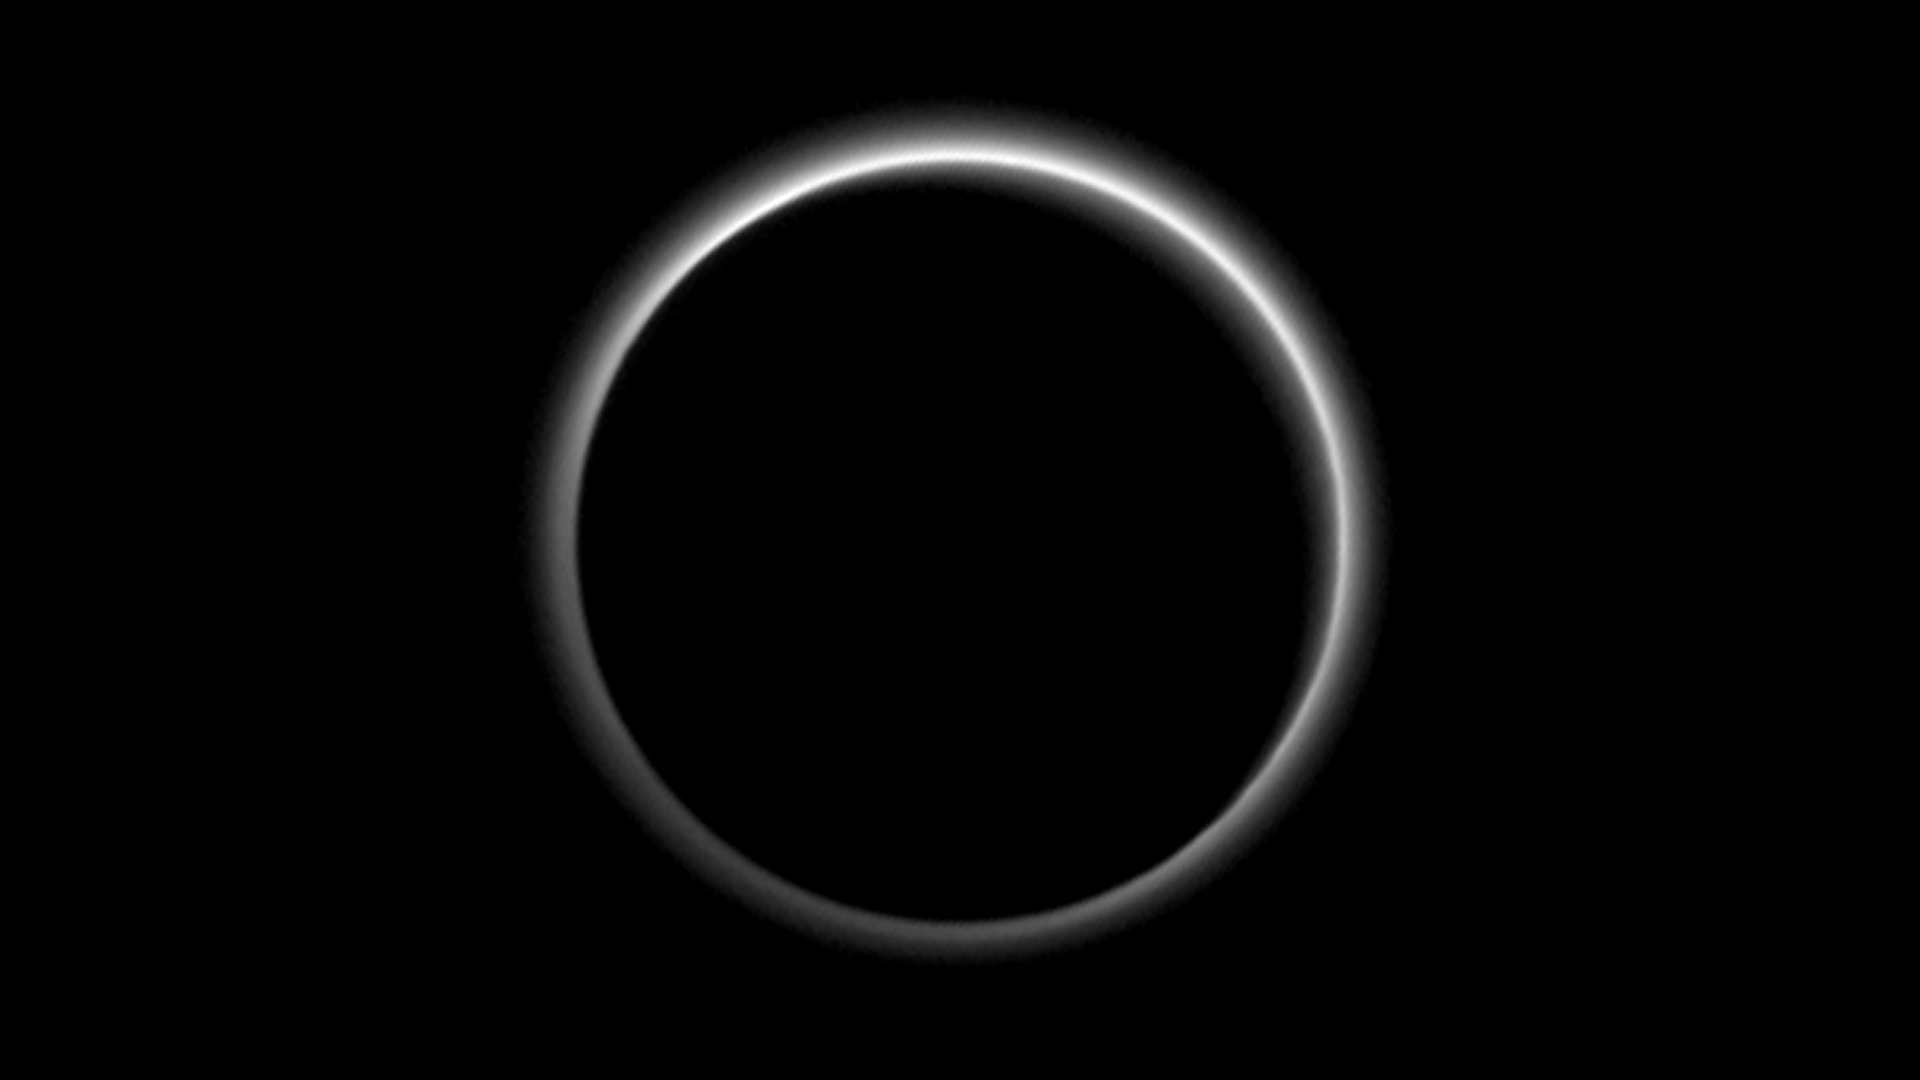 A breathtaking, dramatic image of Pluto backlit by the distant Sun, taken by NASA's New Horizons spacecraft a few hours after its closest approach, on July 14, while at a distance of 2 million km away from the planet. Besides its unparalleled aesthetic quality, this image provided scientists with important information about the structure and dynamics of the Plutonian atmosphere. Image Credit: NASA/Johns Hopkins University Applied Physics Laboratory/Southwest Research Institute